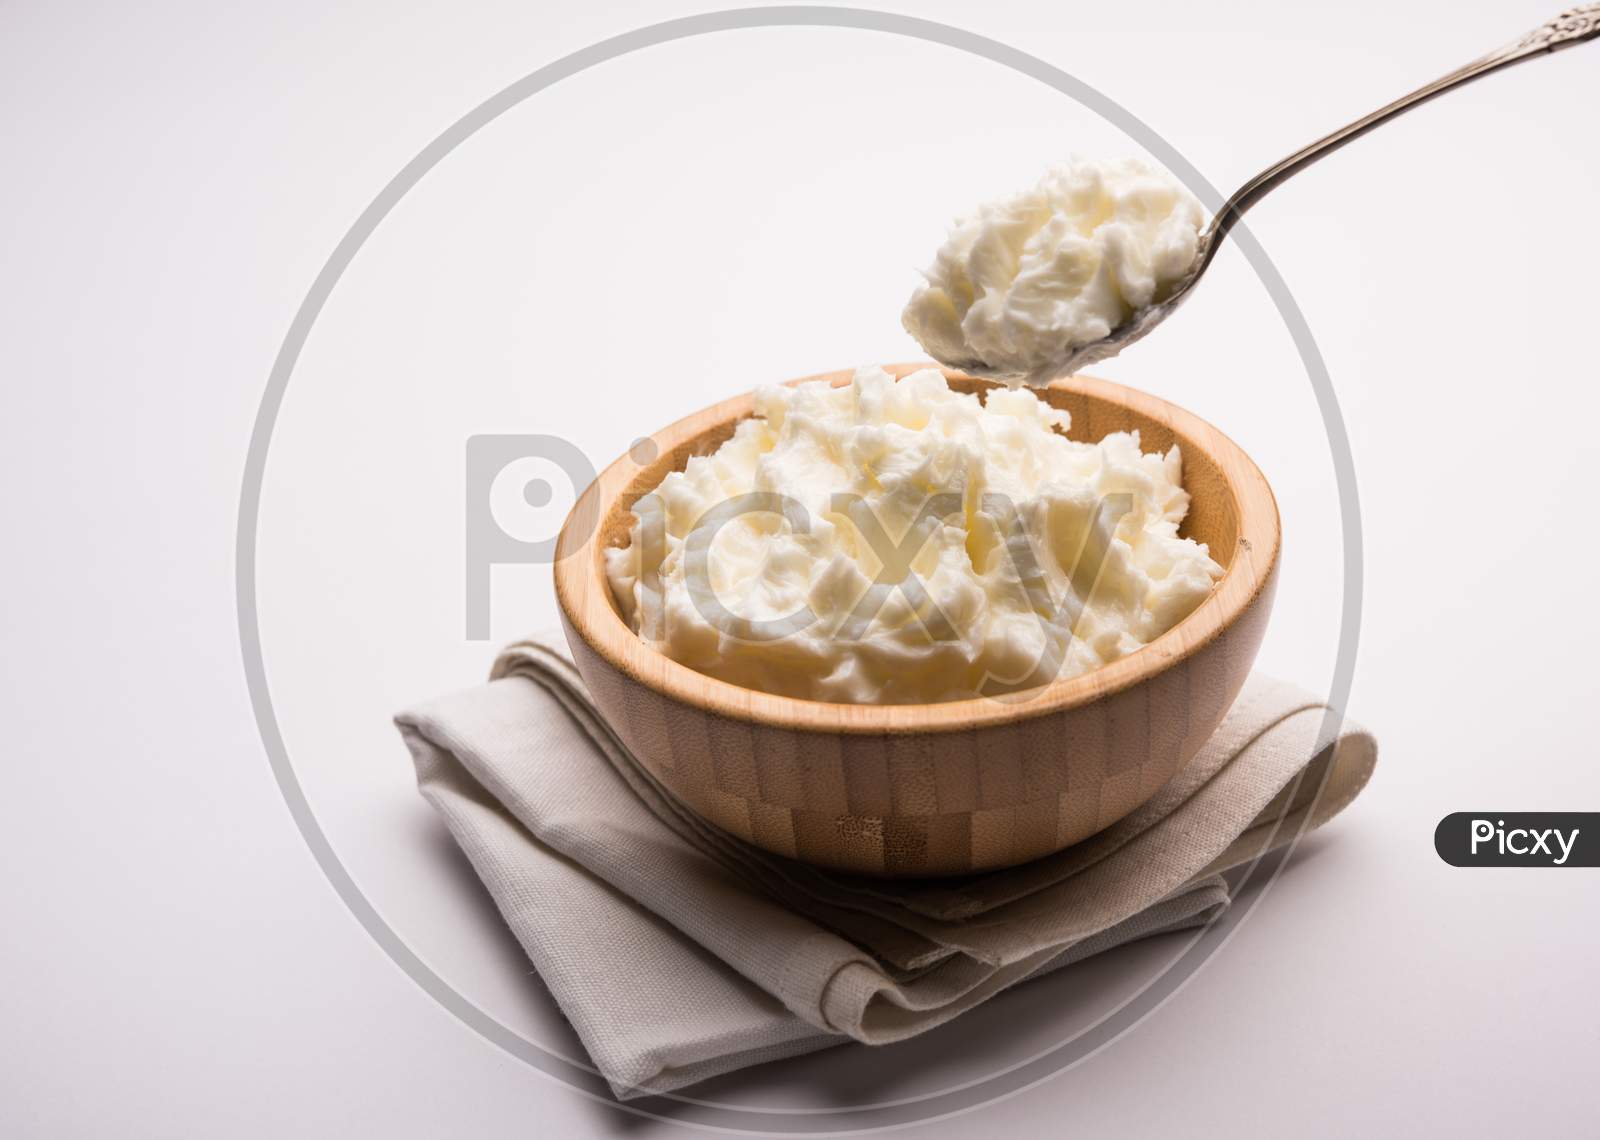 white butter or makhan/makkhan in a bowl